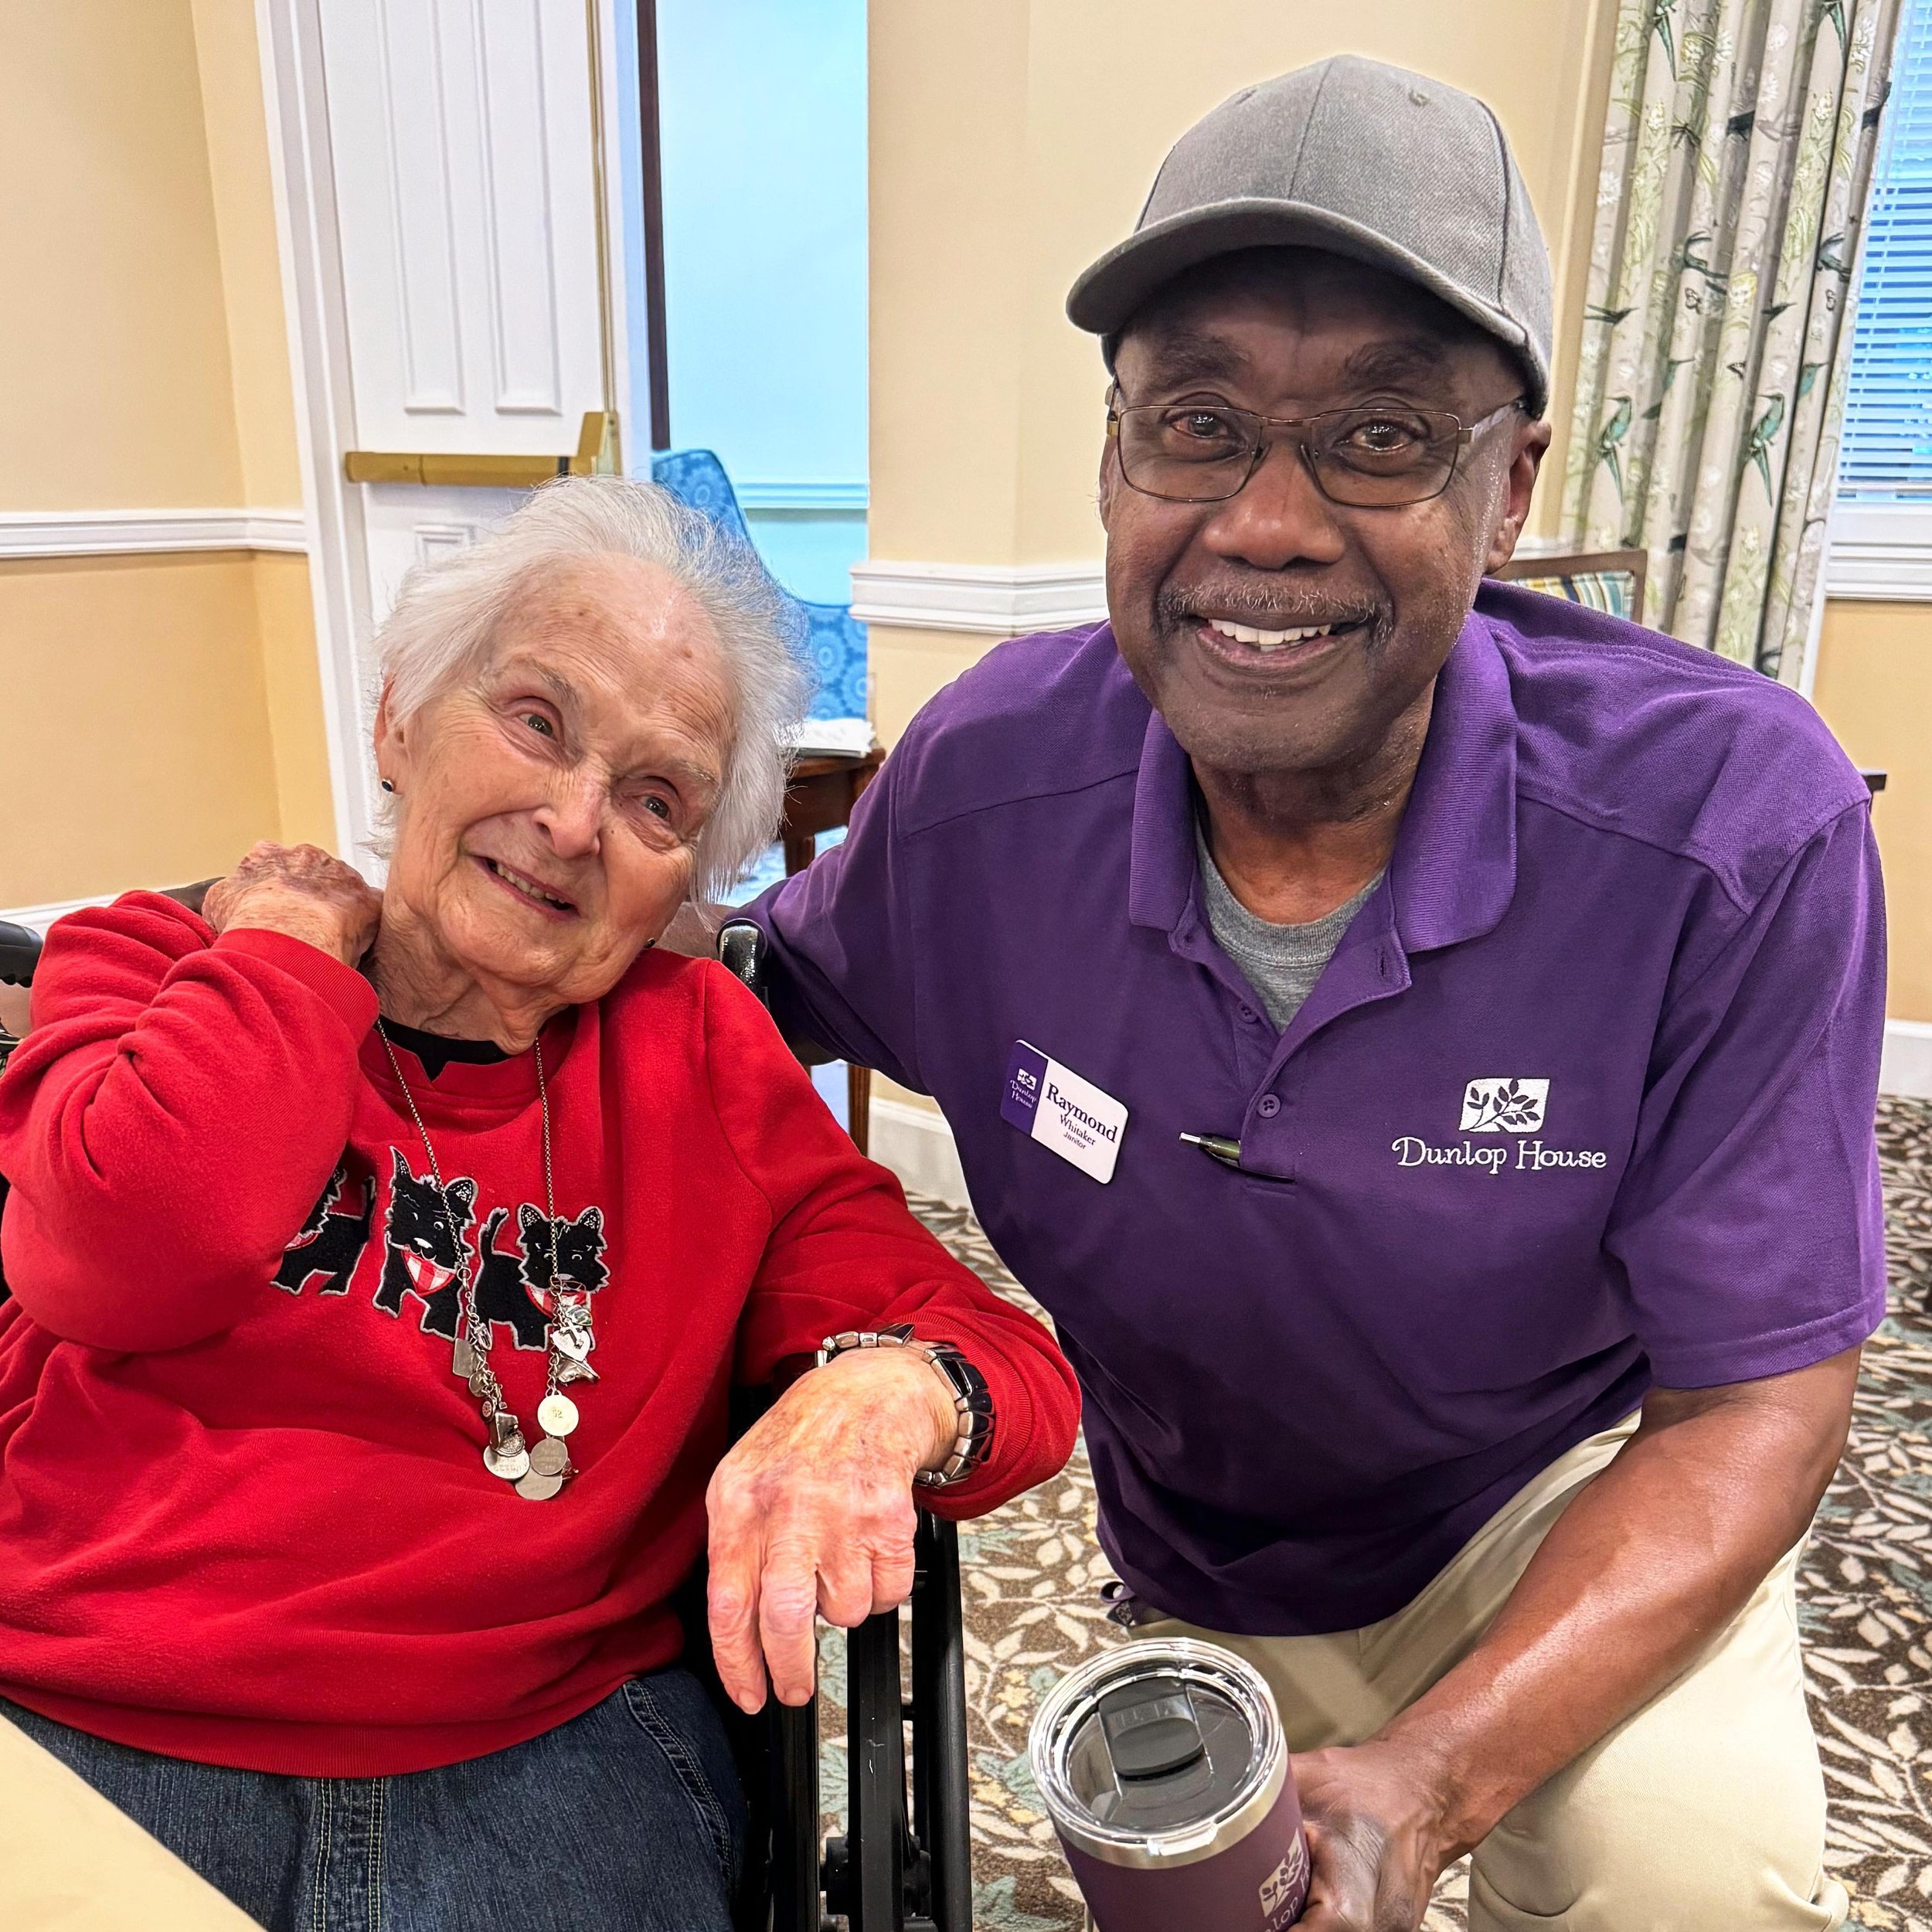 Let&rsquo;s give a big round of applause and show some love for our amazing May Employee of the Month! 💜 

✨ Raymond Whitaker, Janitor ✨

Raymond&rsquo;s dedication, hard work, and positive attitude have truly made a difference in our team&rsquo;s s